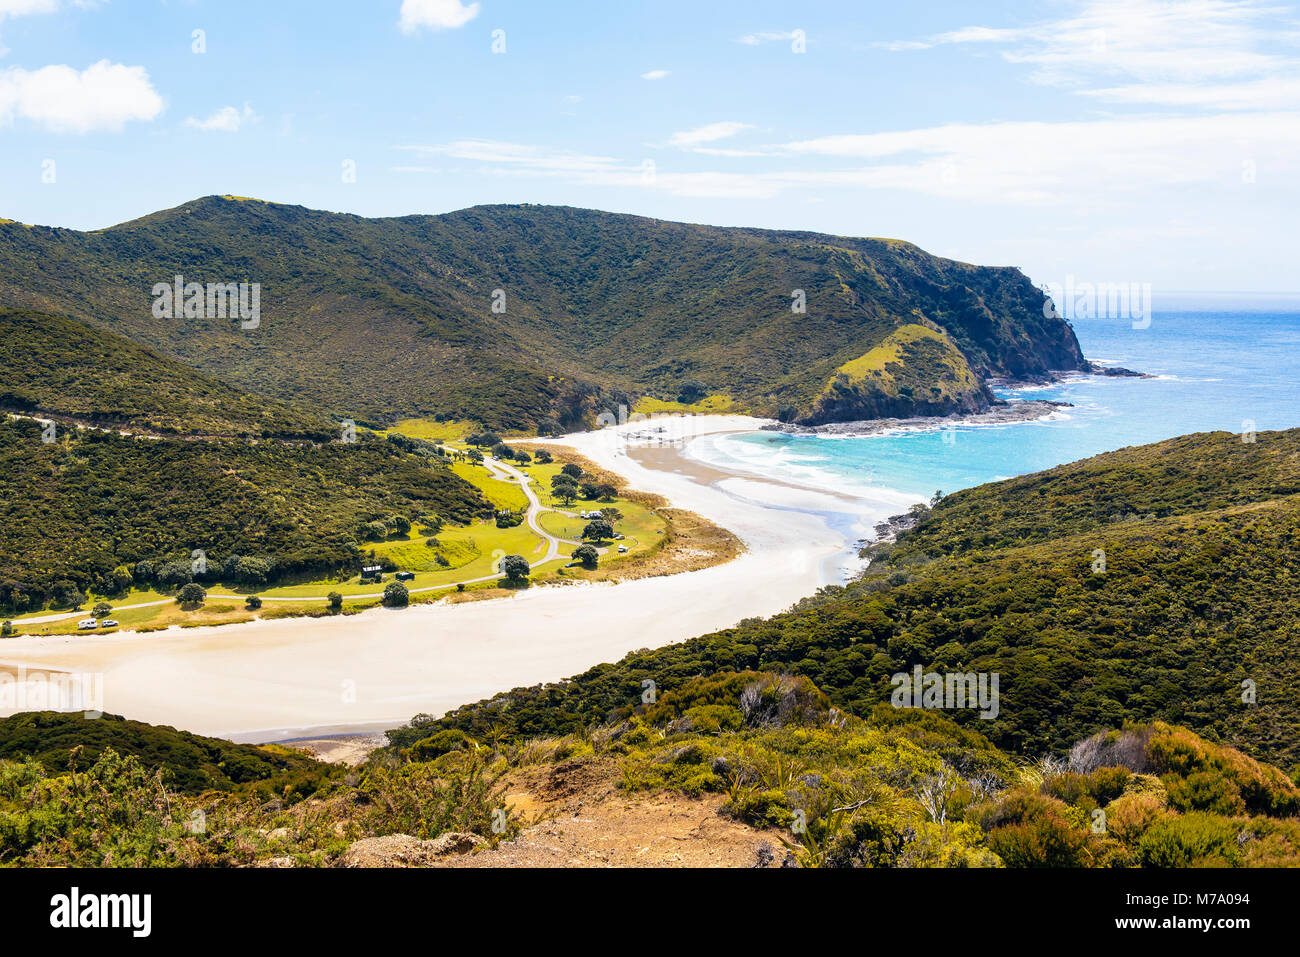 View over Tapotupotu Bay and campground, near Cape Reinga, North Island, New Zealand Stock Photo